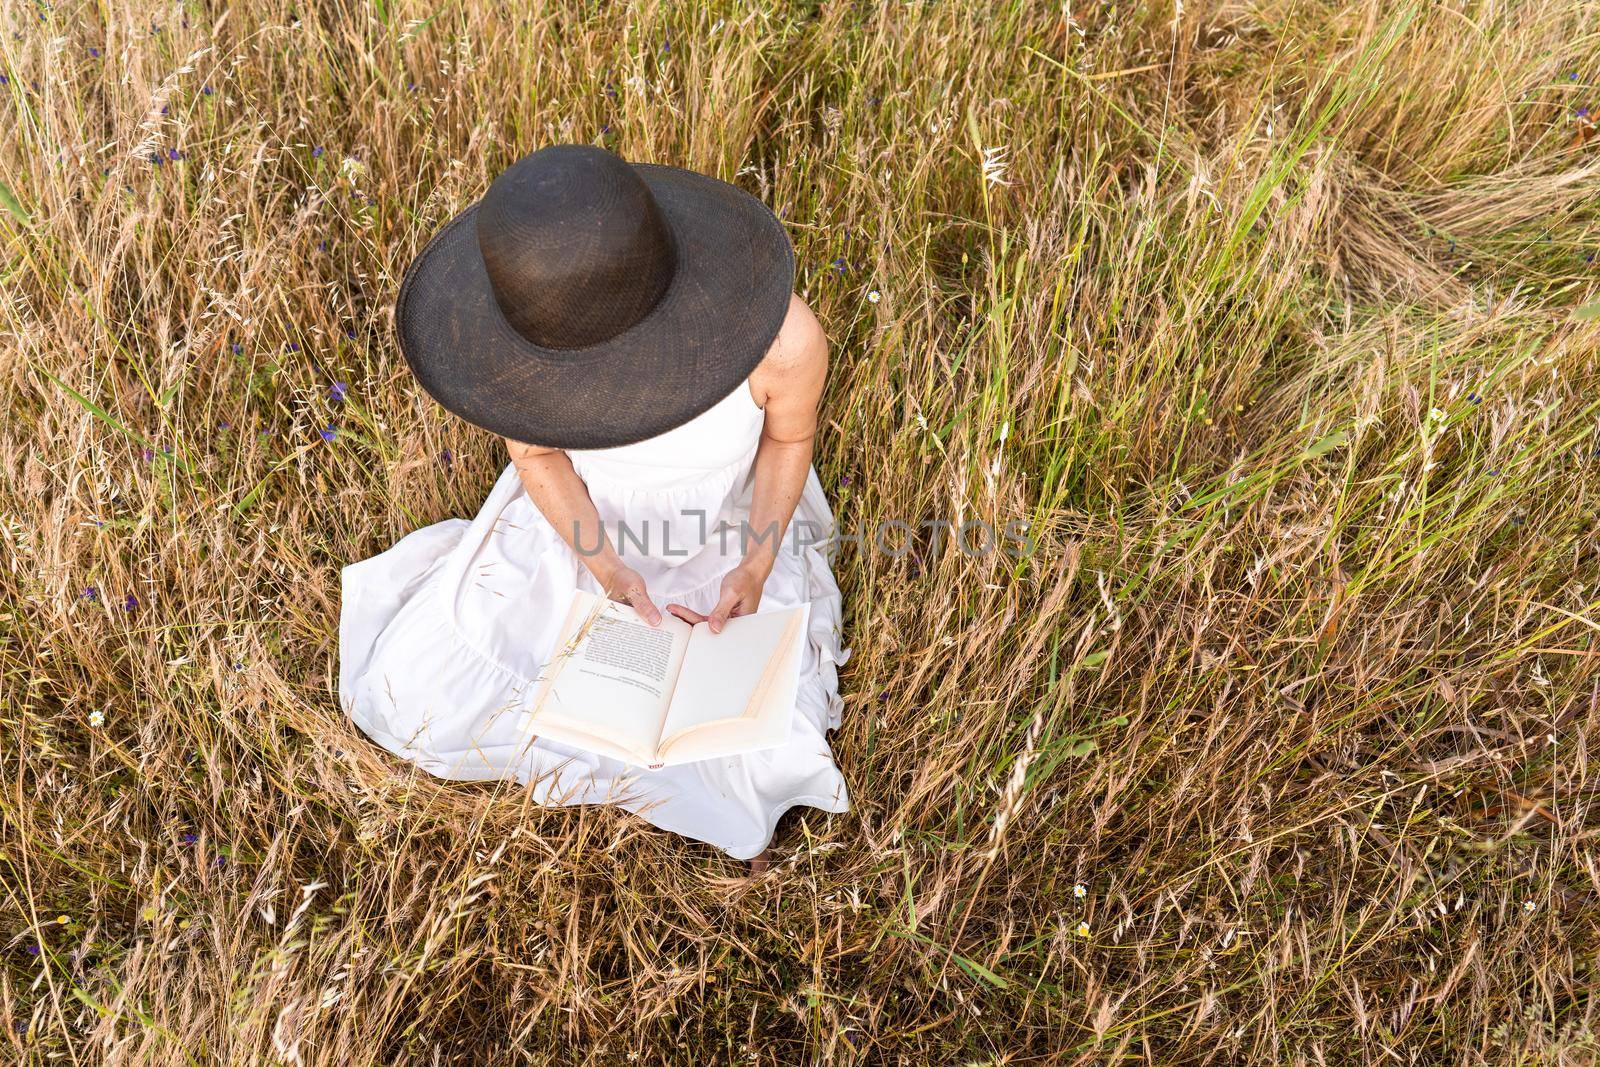 Romantic dreamy top view scene of unrecognizable woman sitting in a field of wheat and tall yellow grass wearing a dark wide-brimmed hat holding a book. Boho girl reading preferred romance story tale by robbyfontanesi